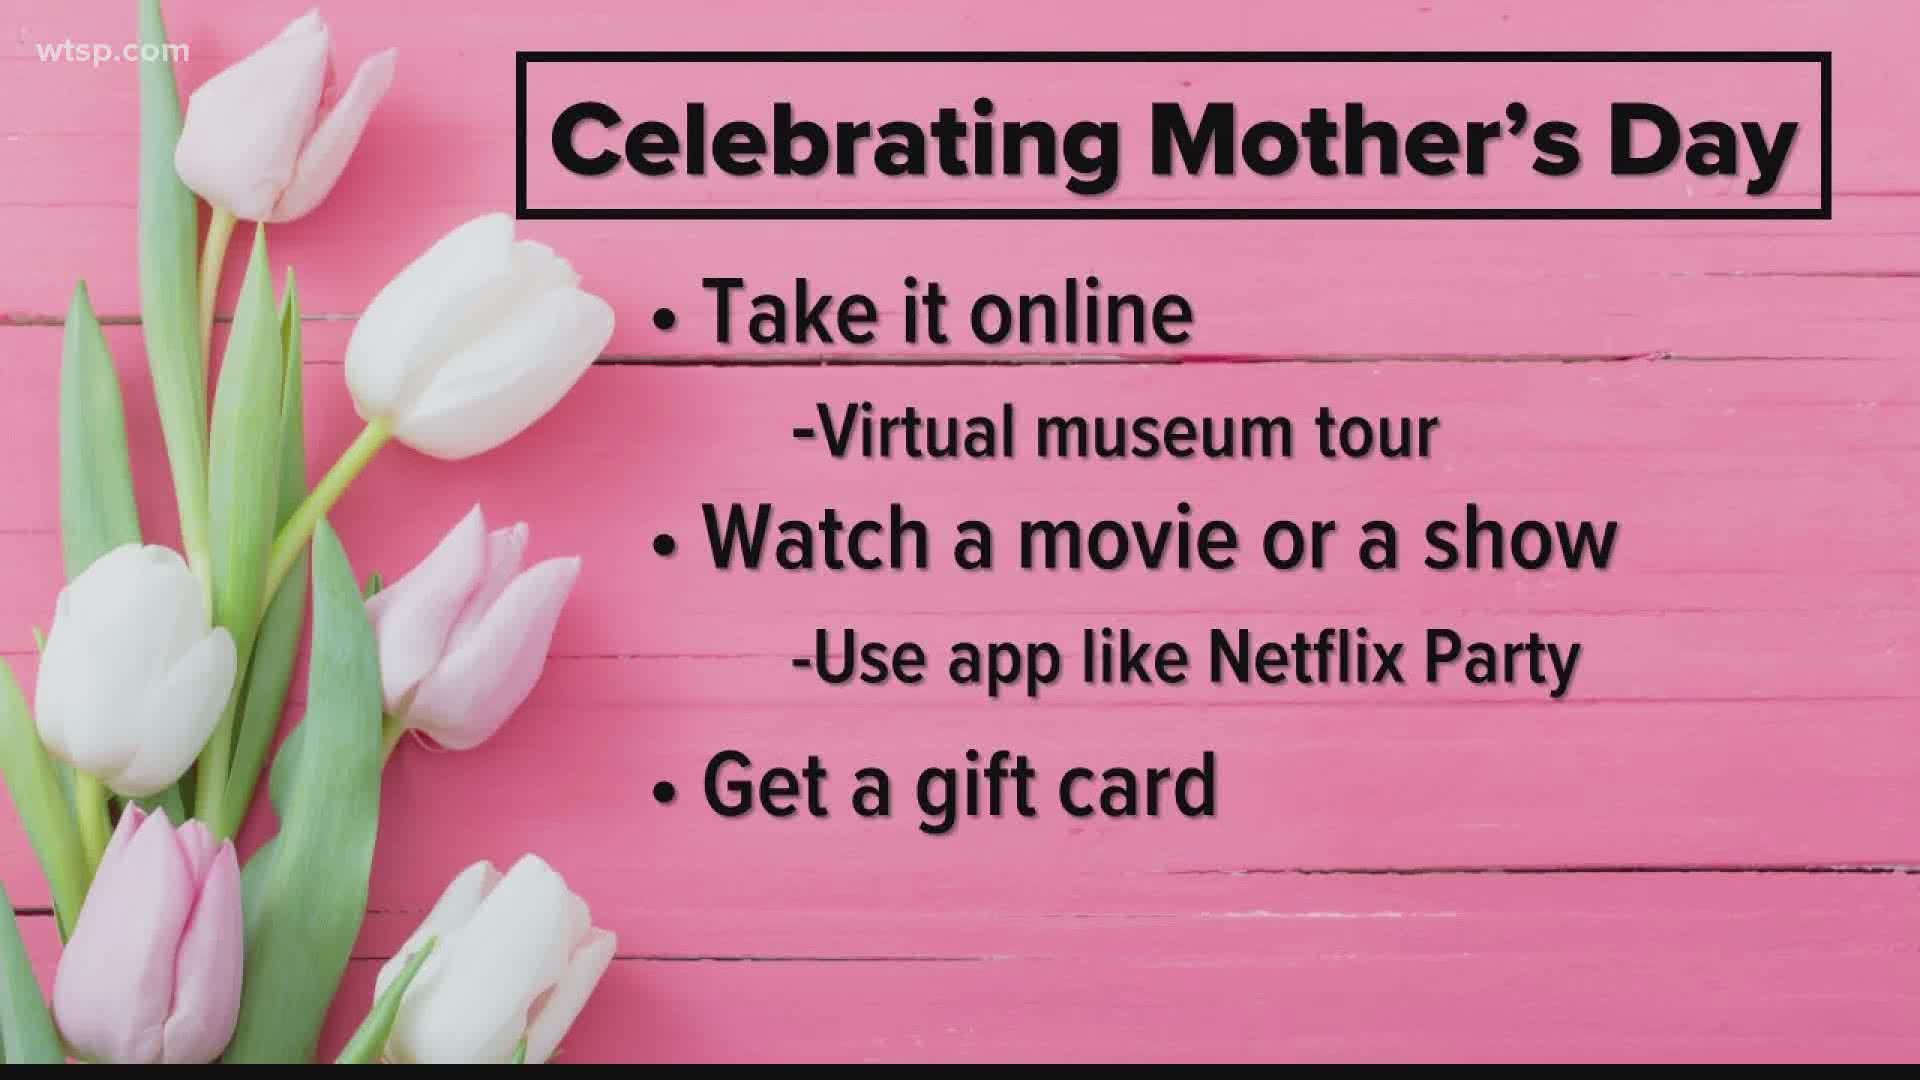 Moms do so much for all of us, so it's time to show her how much you love and appreciate her.